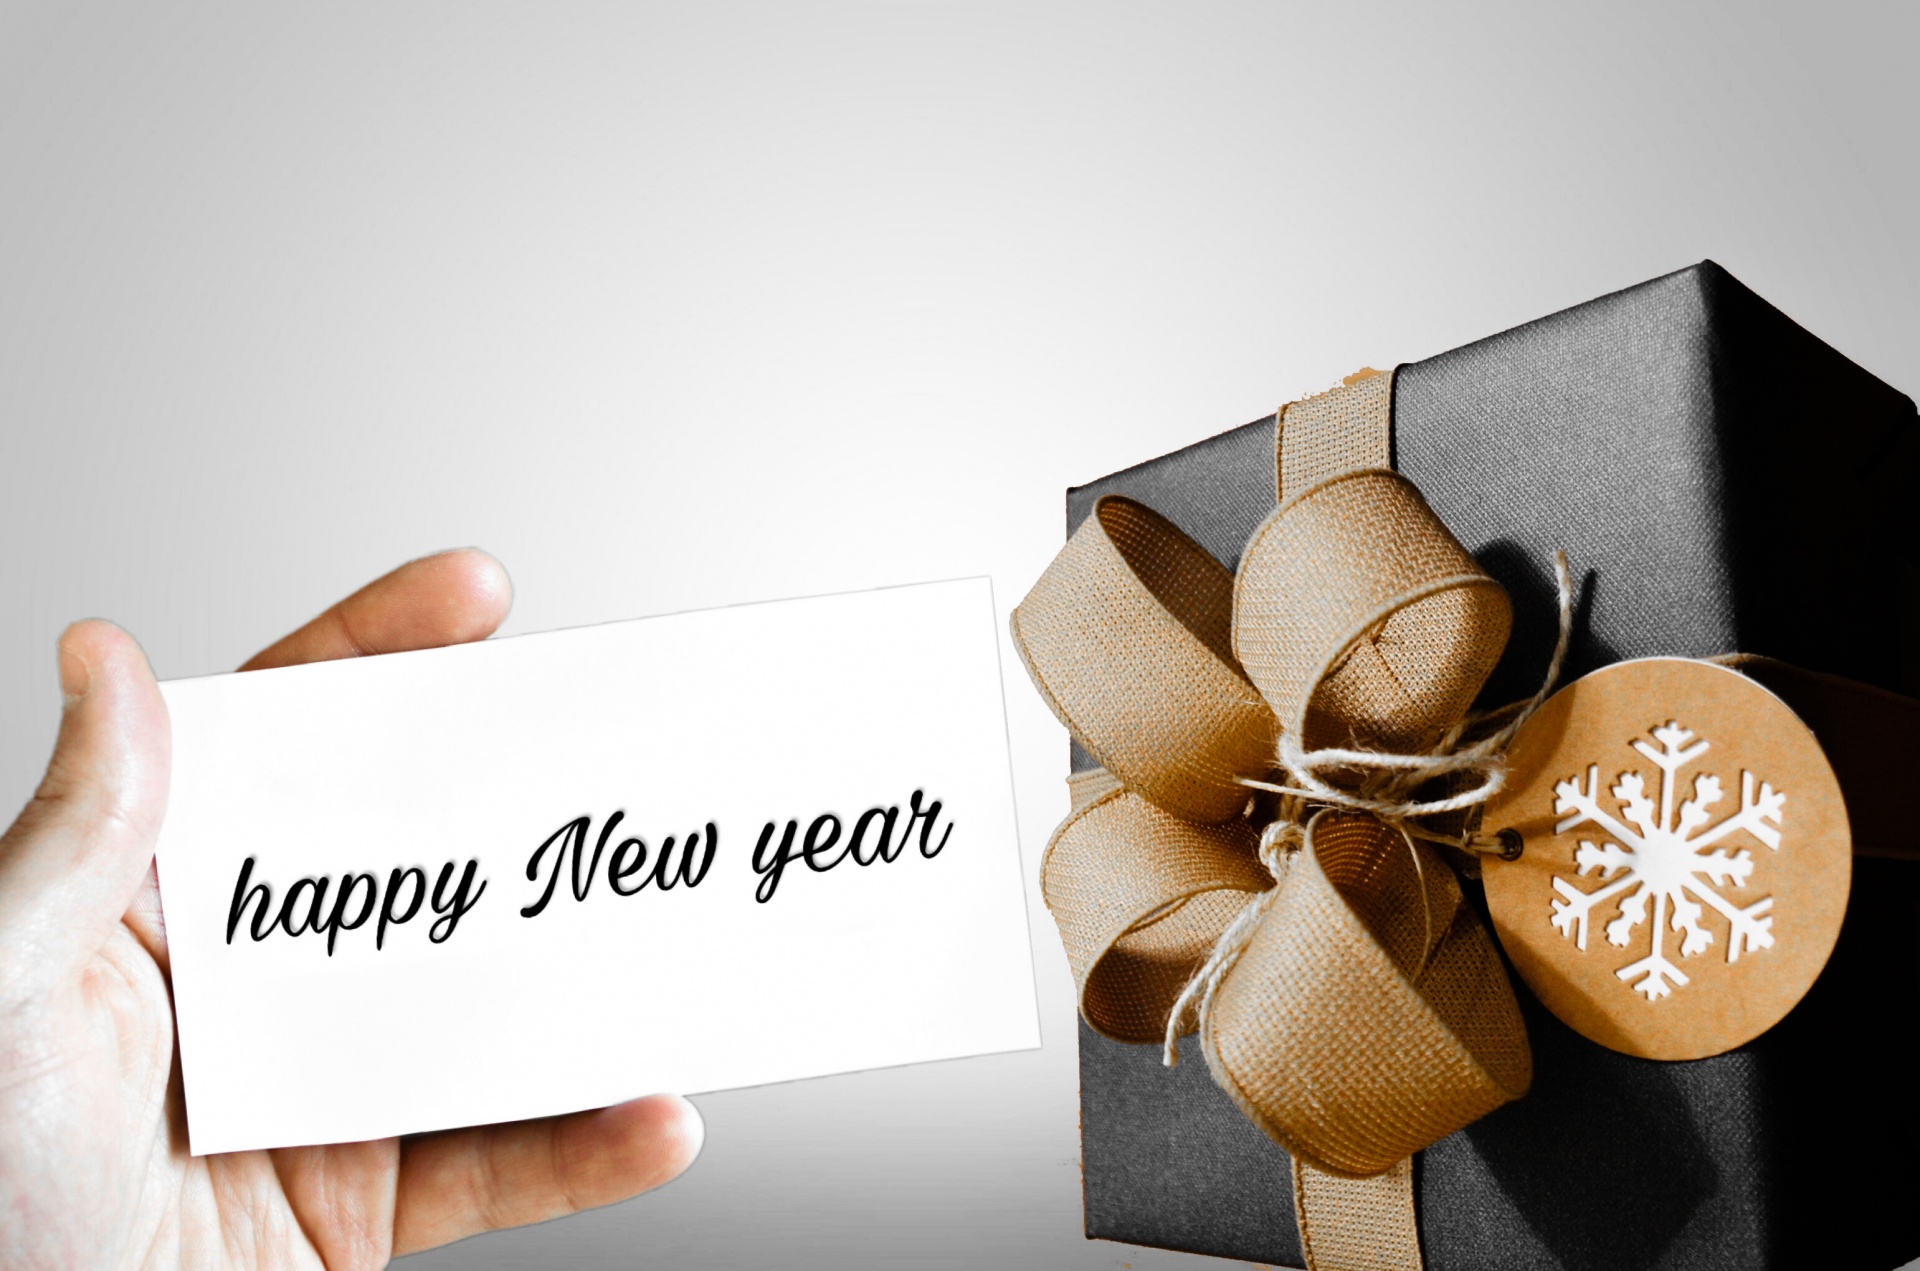 new year, present, gift, happy new year, hand, greeting, card, celebration, paper, 2019, 2020, message, communication, font, simple, box, bow, ribbon, black, package, christmas